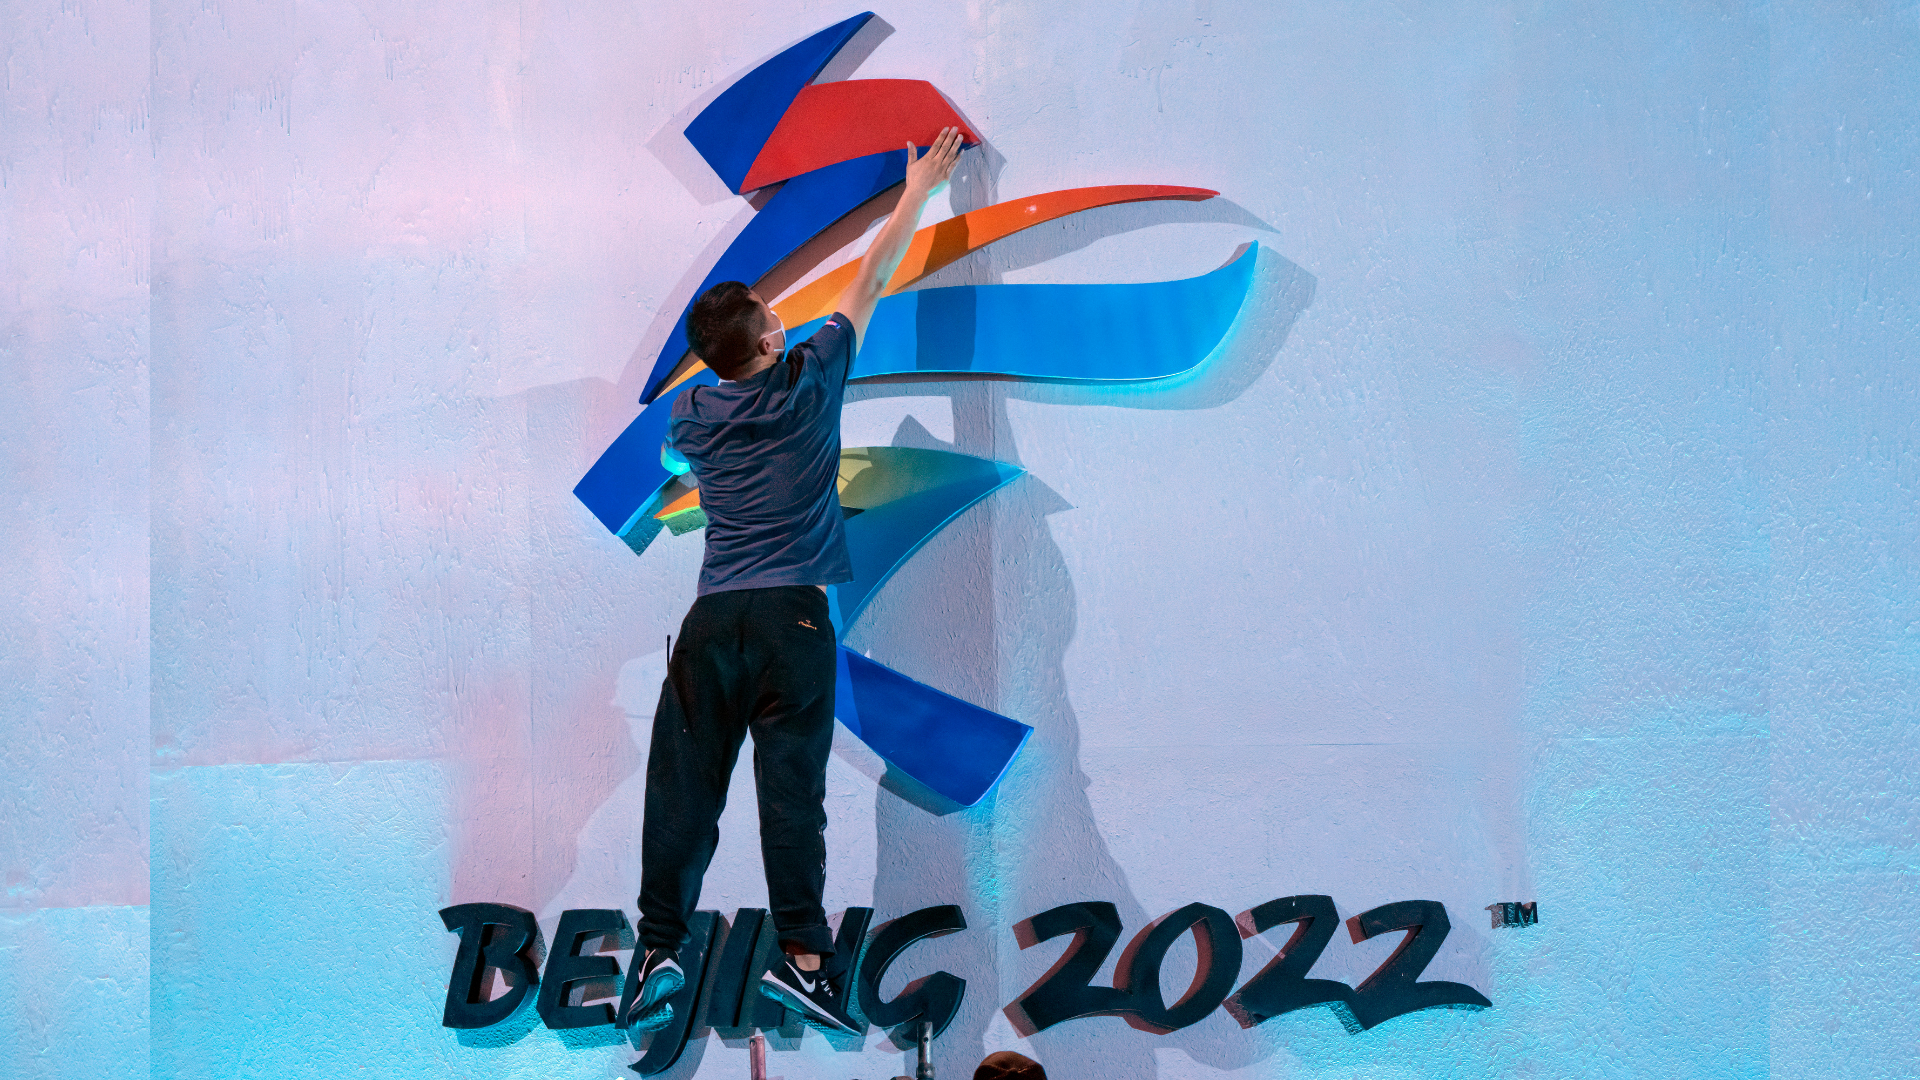 A crew member leaps to fix a logo for the 2022 Beijing Winter Olympics before a launch ceremony to ...